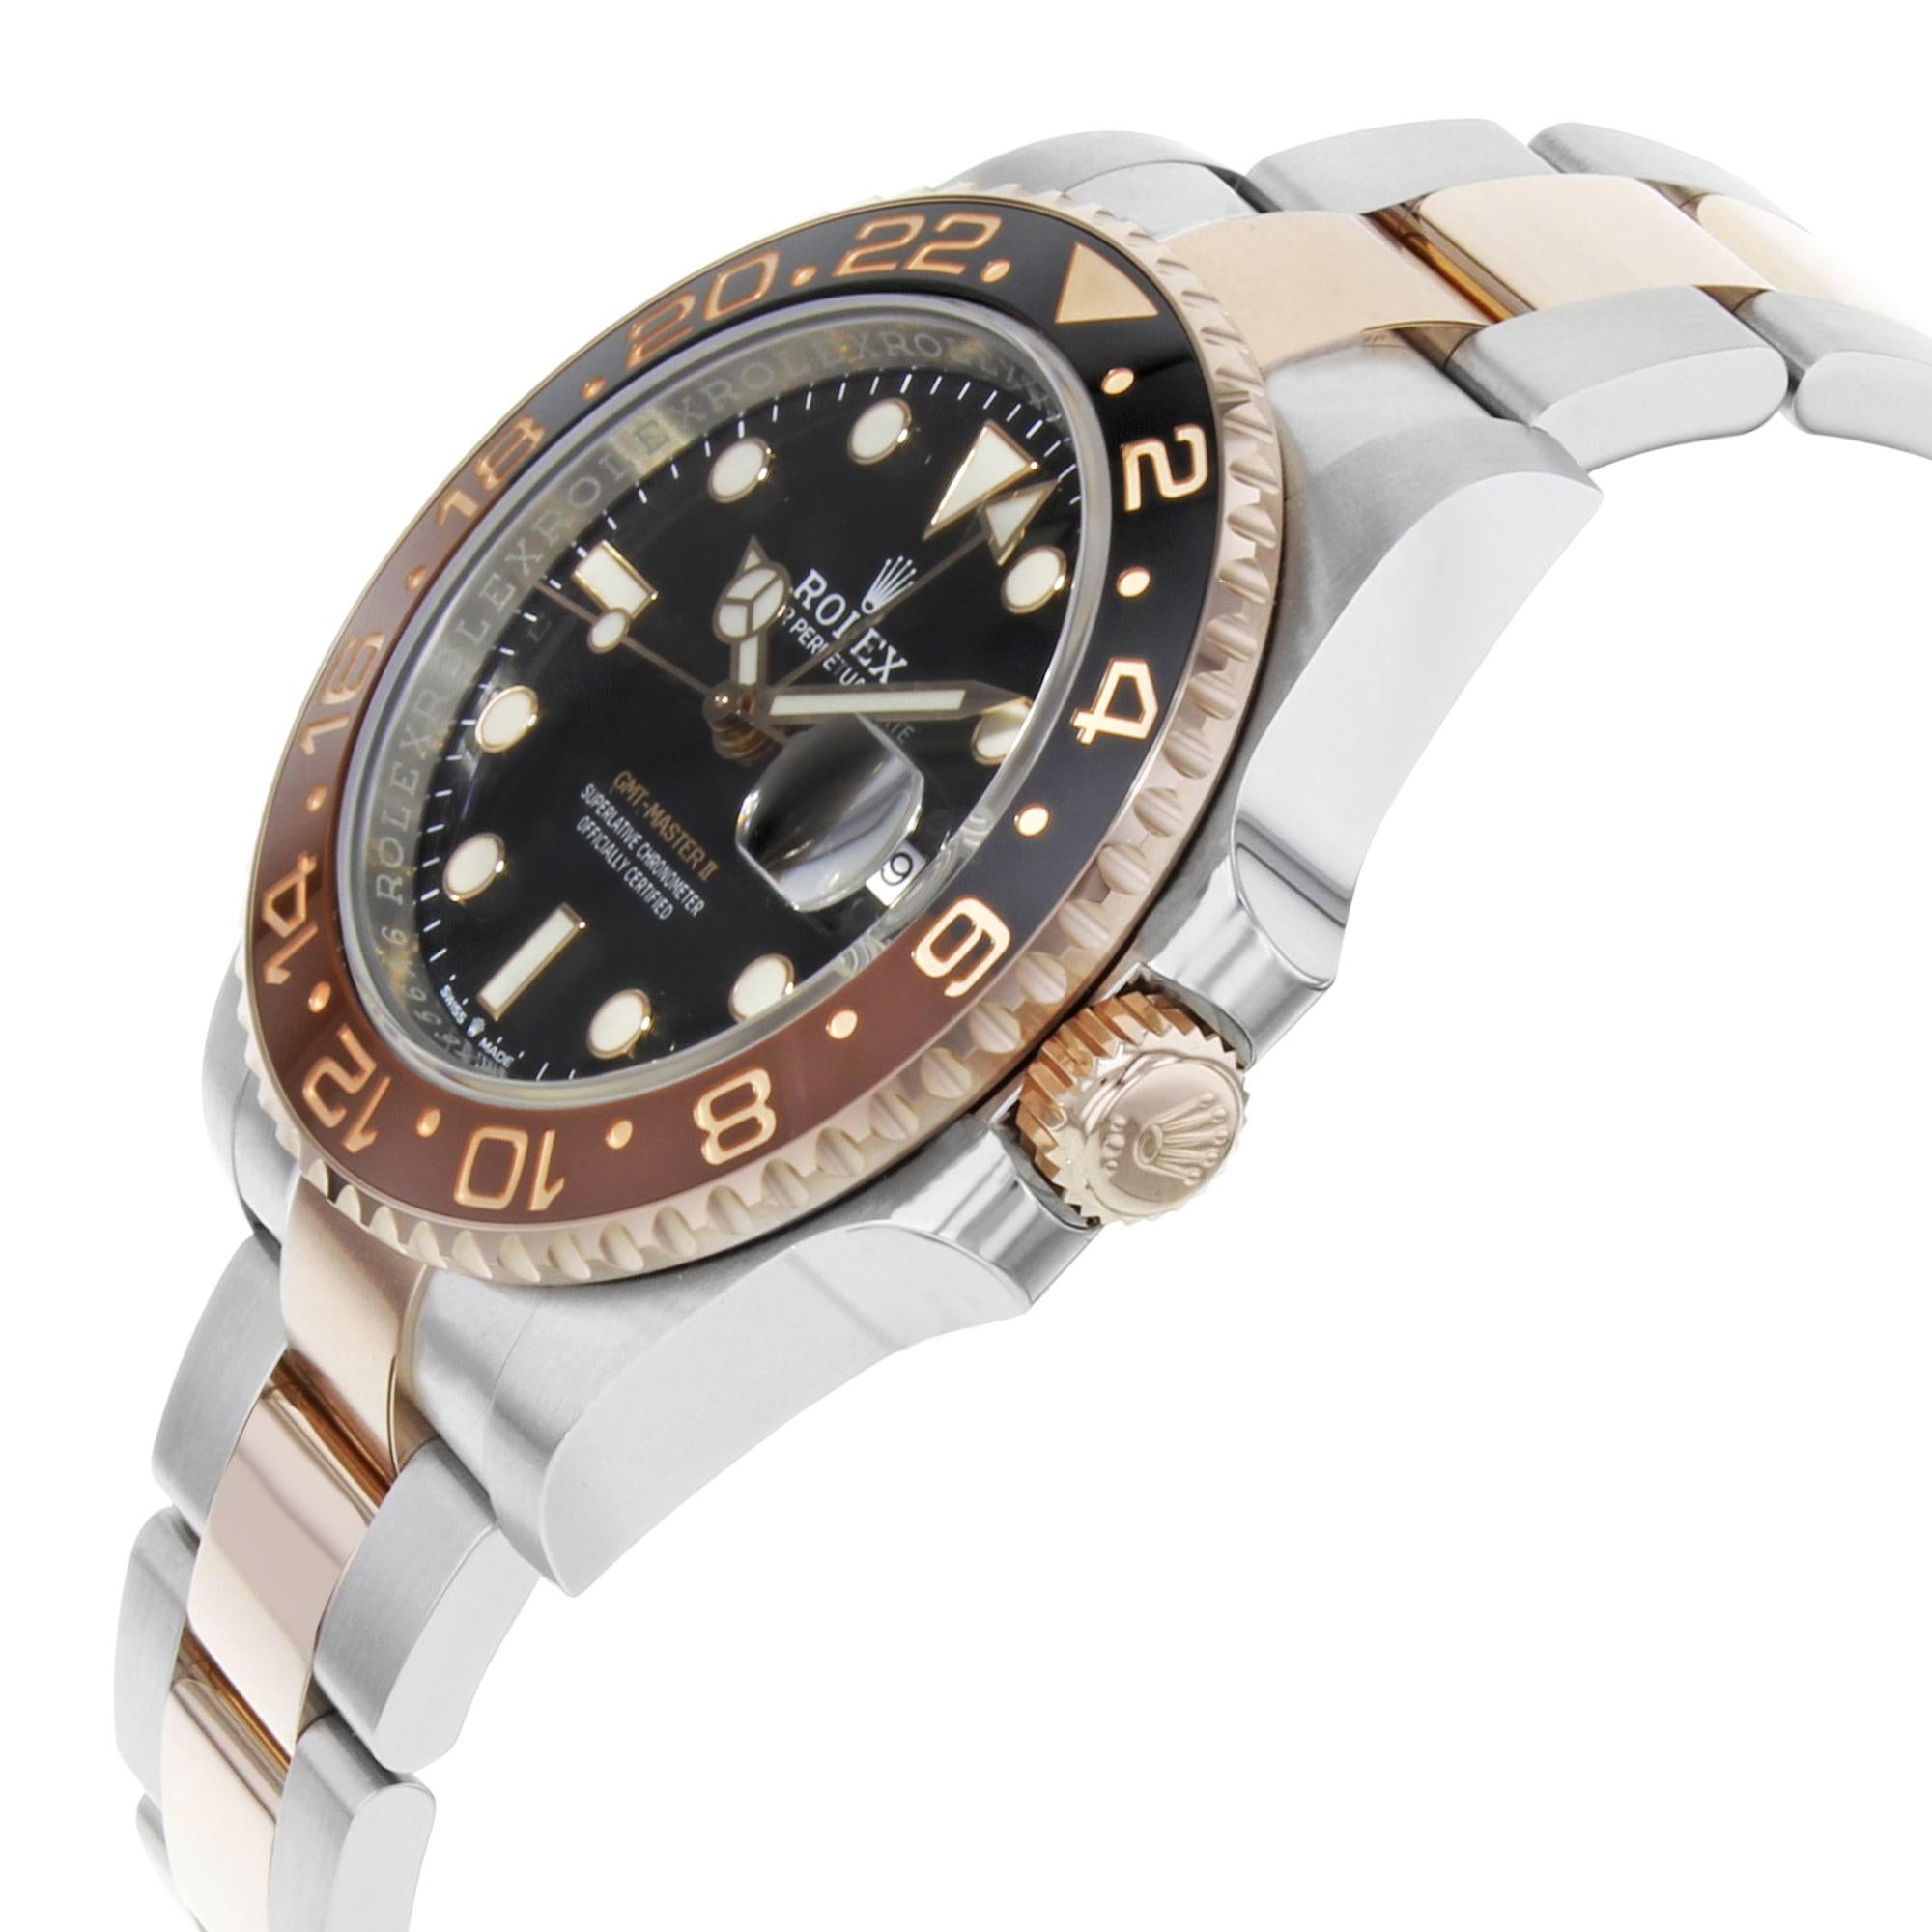 This New Without Tags Rolex GMT-Master II 126711 is a beautiful men's timepiece that is powered by an automatic movement which is cased in a stainless steel case. It has a round shape face, date dial and has hand sticks & dots style markers. It is